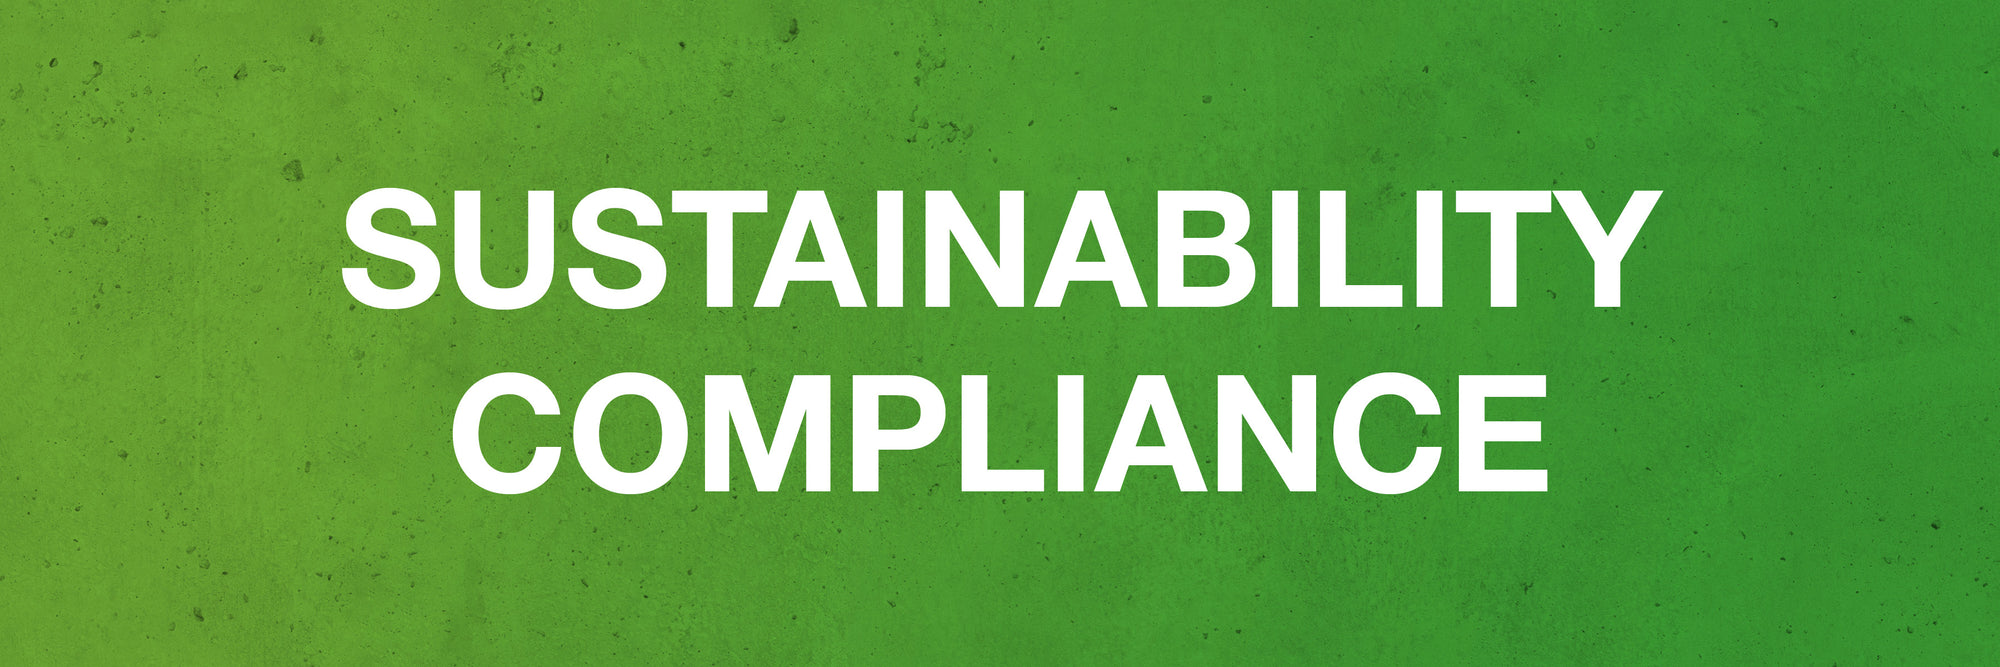 Sustainability Compliance